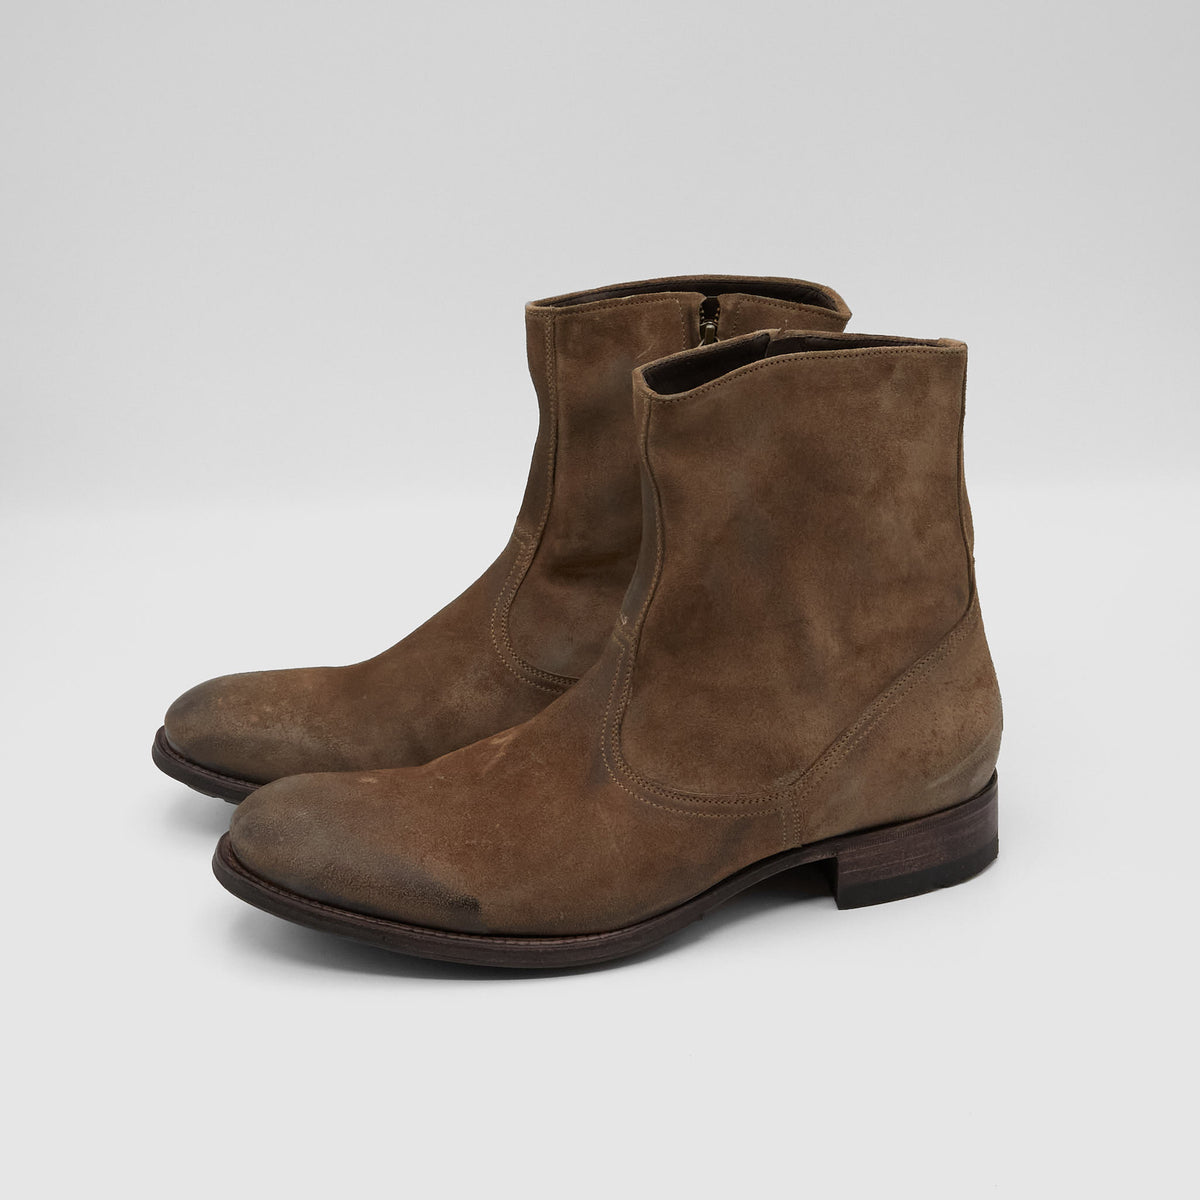 n.d.c. Christophe R Softy Boots